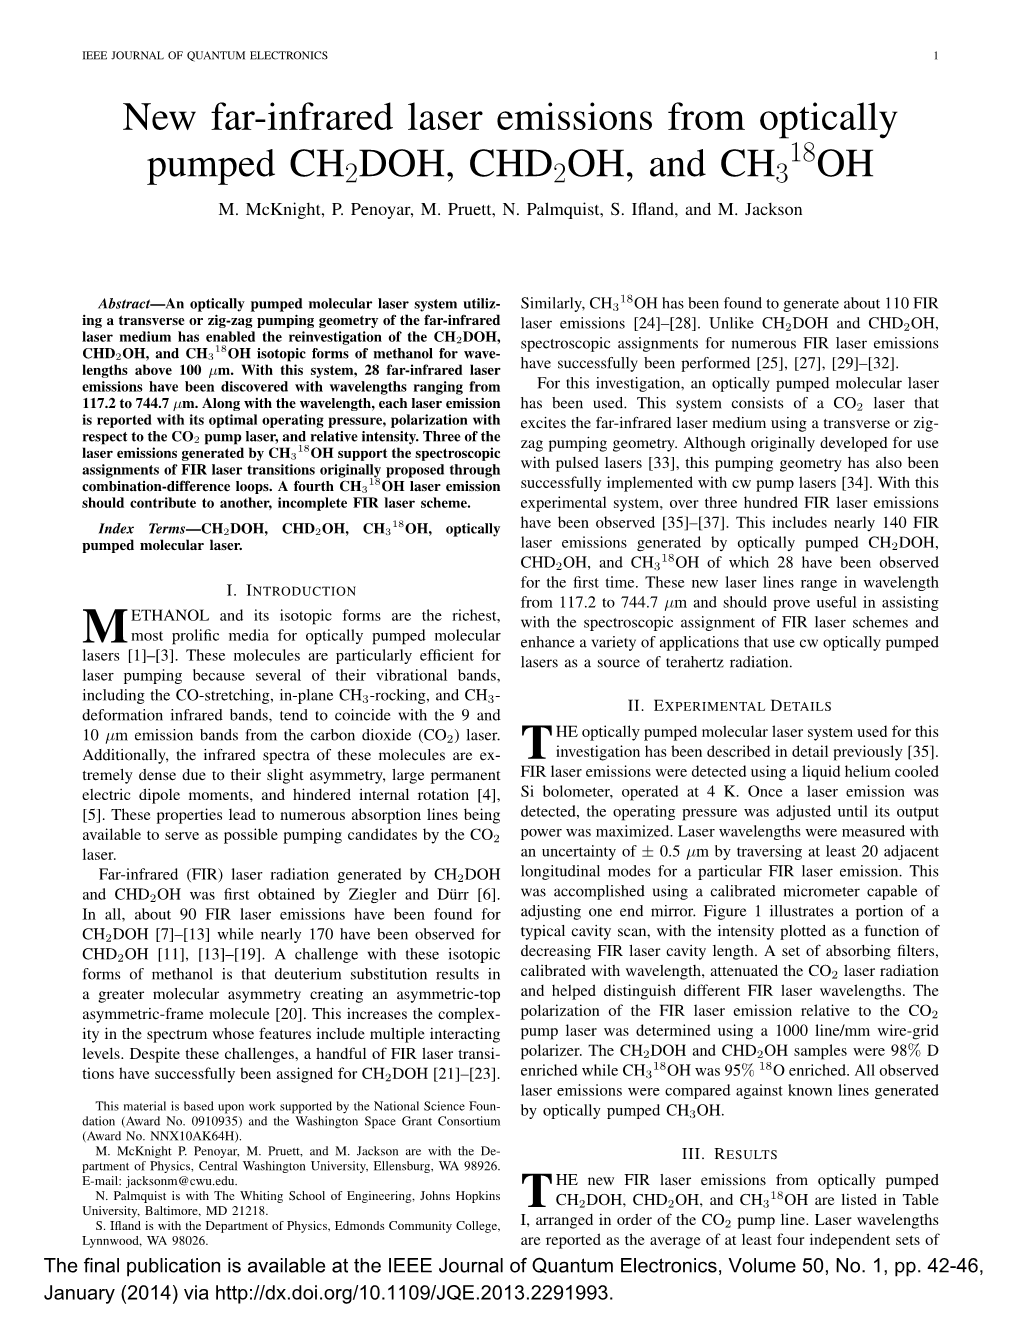 New Far-Infrared Laser Emissions from Optically Pumped CH2DOH